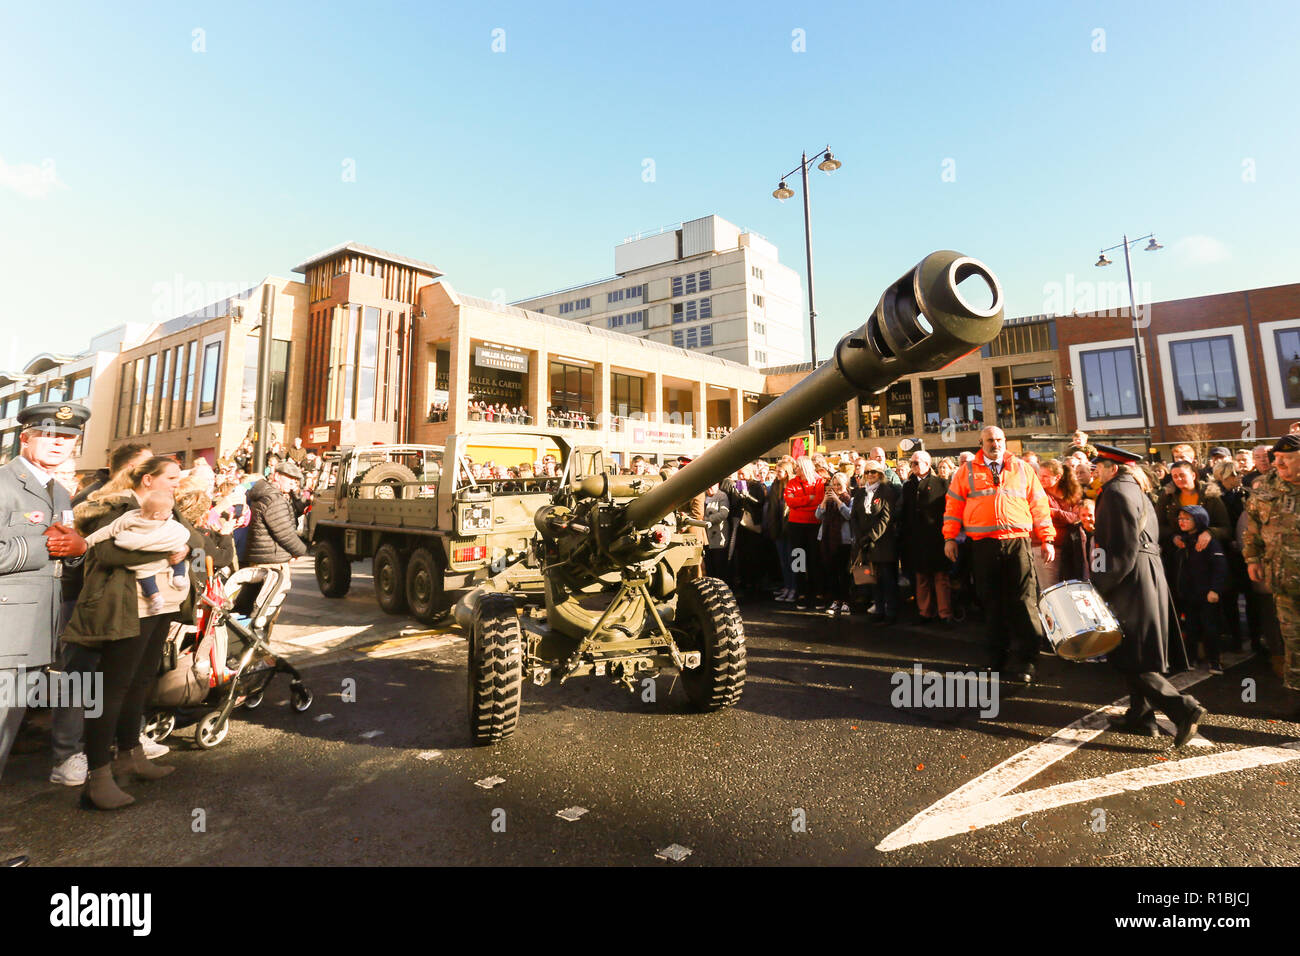 Worcester, UK. 11th November, 2018. The end of the First World War is commemorated at Worcester Cathedral. A modern gun is towed through the parade. Peter Lopeman/Alamy Live News Stock Photo